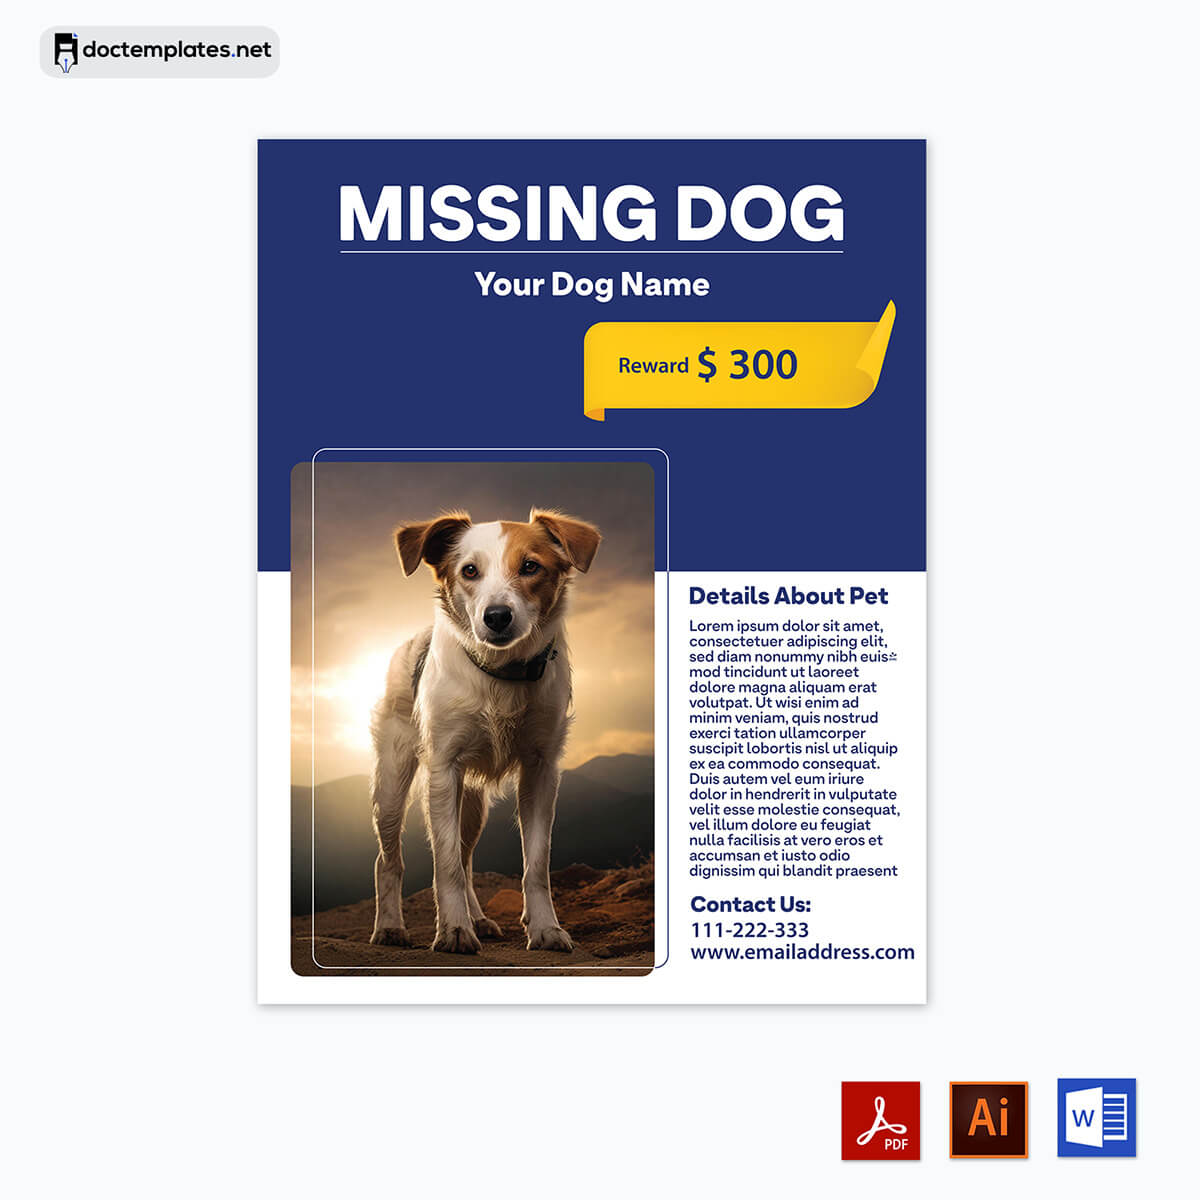 "Engaging Cat-Dog Flyer" - Engage the community in your search with this captivating lost pet flyer template.